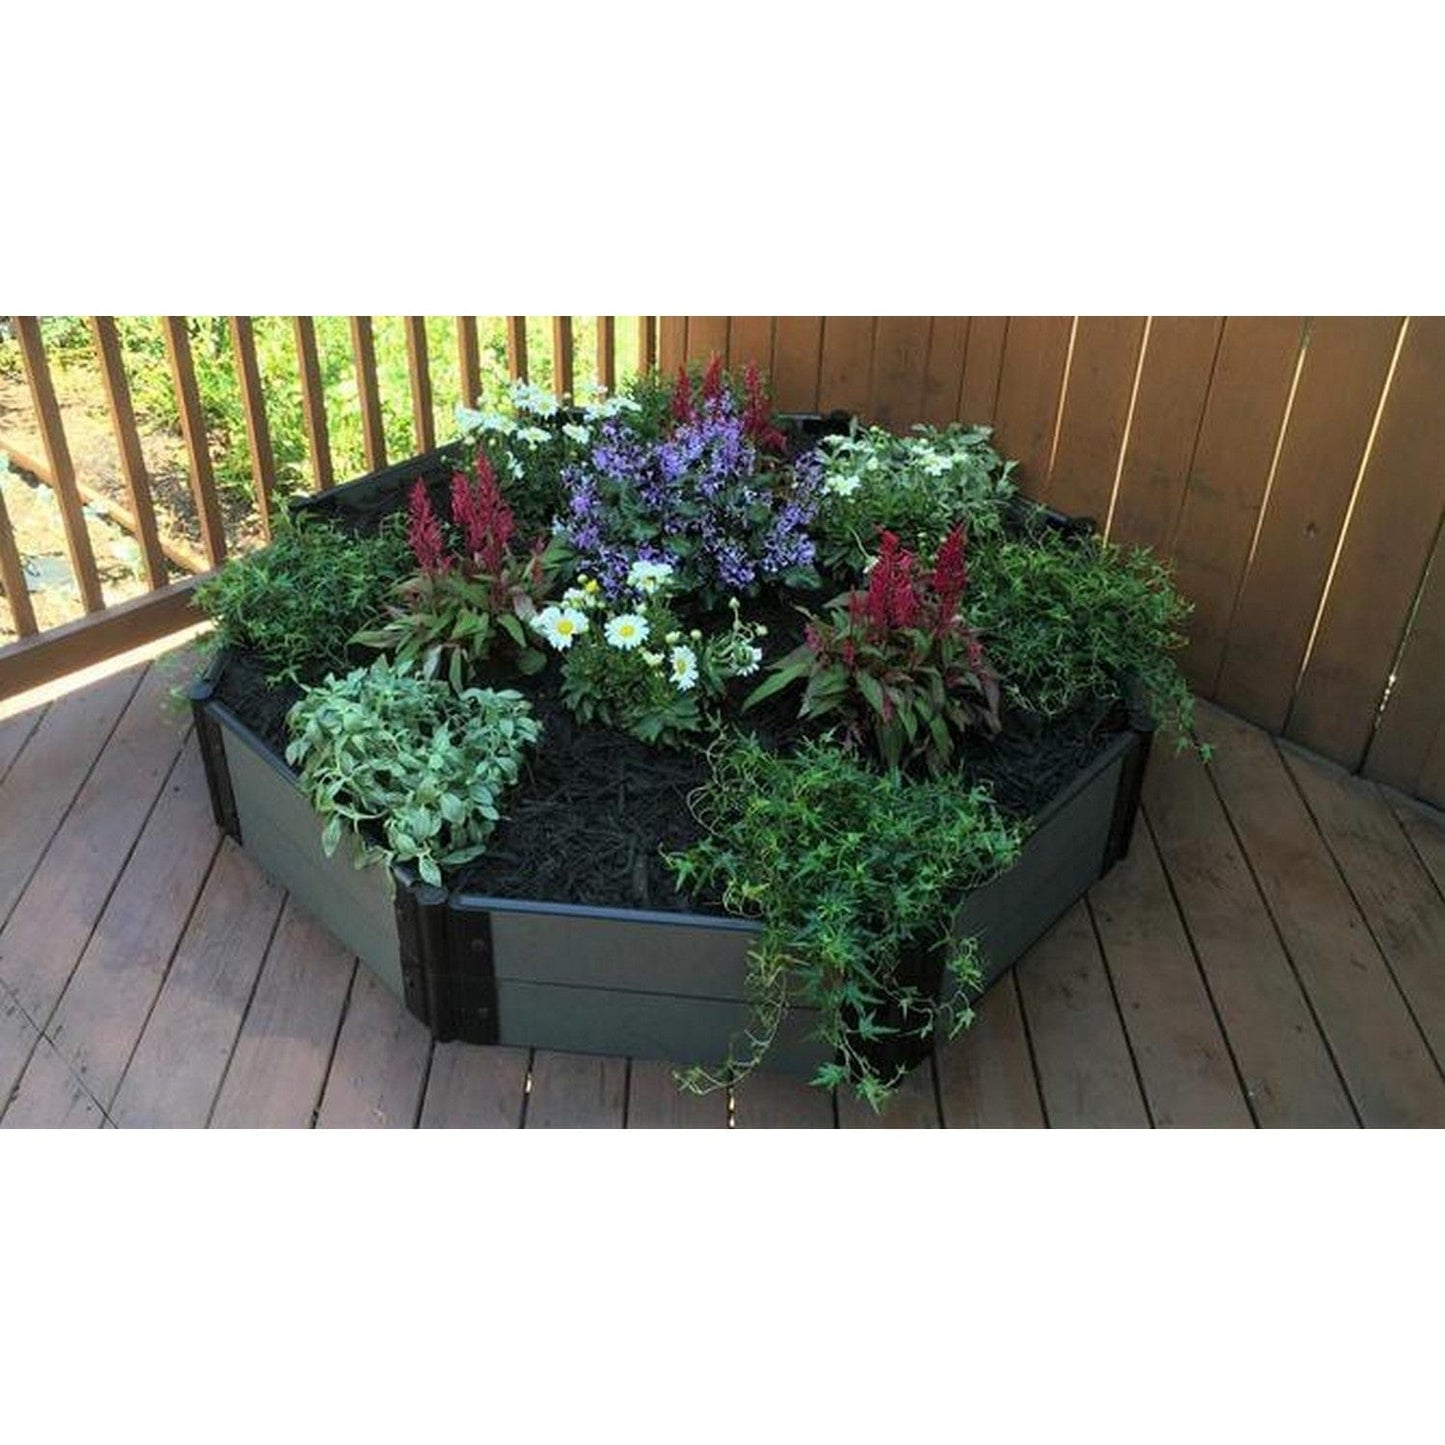 Frame It All Gardening Accessories Frame It All | Tool-Free St. John Baptistry Raised Garden Bed (Octagon) 5' X 5' X 22" - Classic Sienna - 1" Profile 200004459